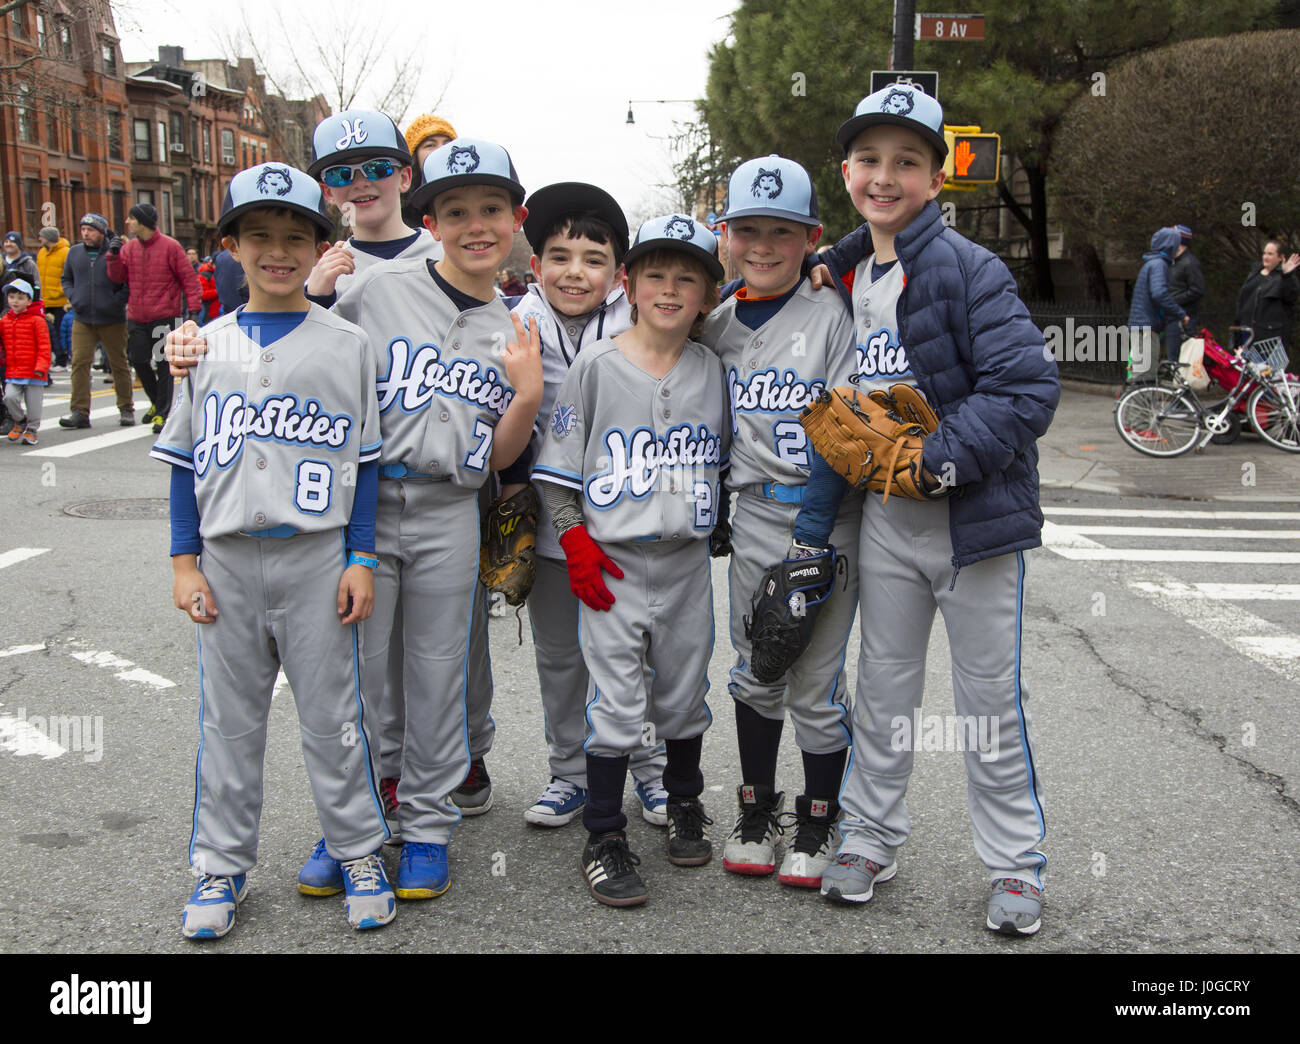 Parents and little leaguers march in the annual Little League Parade in Park Slope Brooklyn to kick off the 2017 baseball season in Brooklyn, NY. Stock Photo